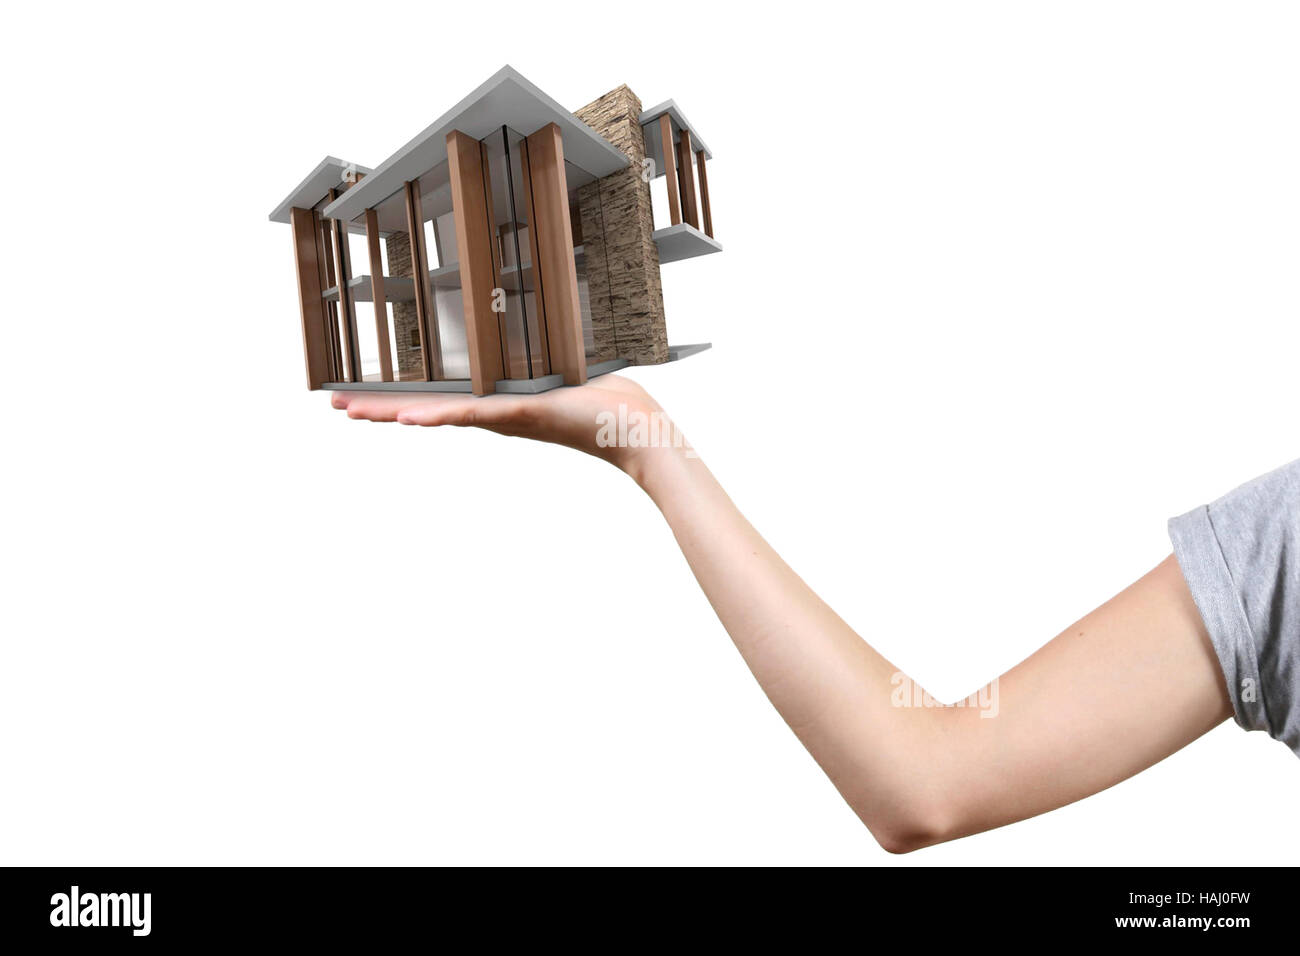 Concept of real estate business: house on the hand Stock Photo